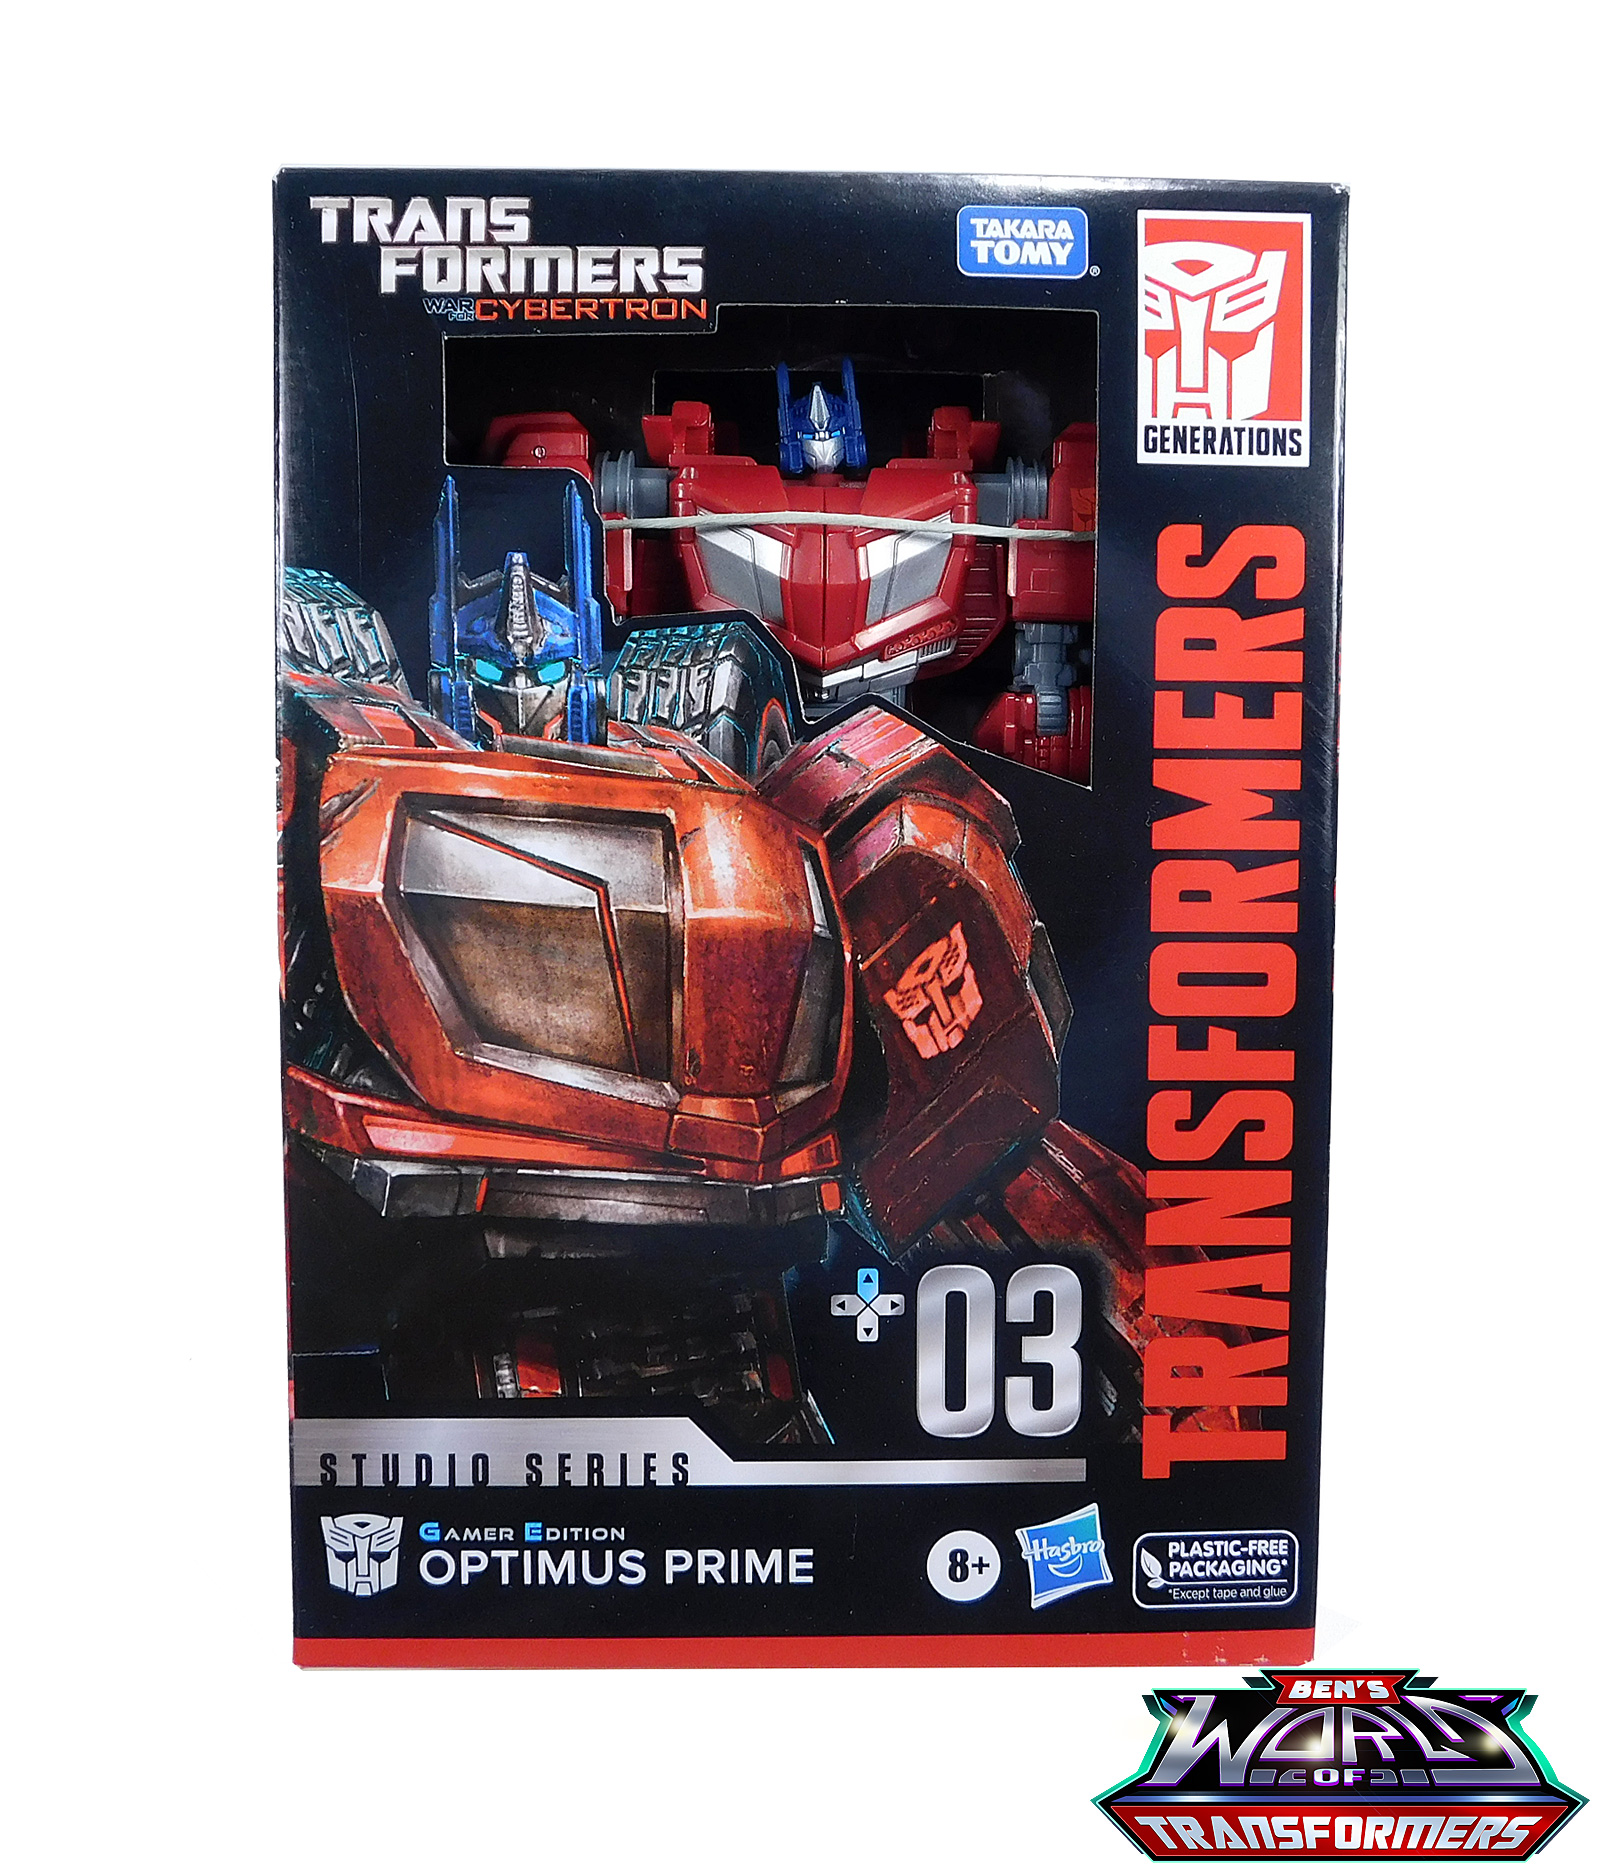 Generations Studio Series Gamer Edition Optimus Prime Toy Review Ben S World Of Transformers